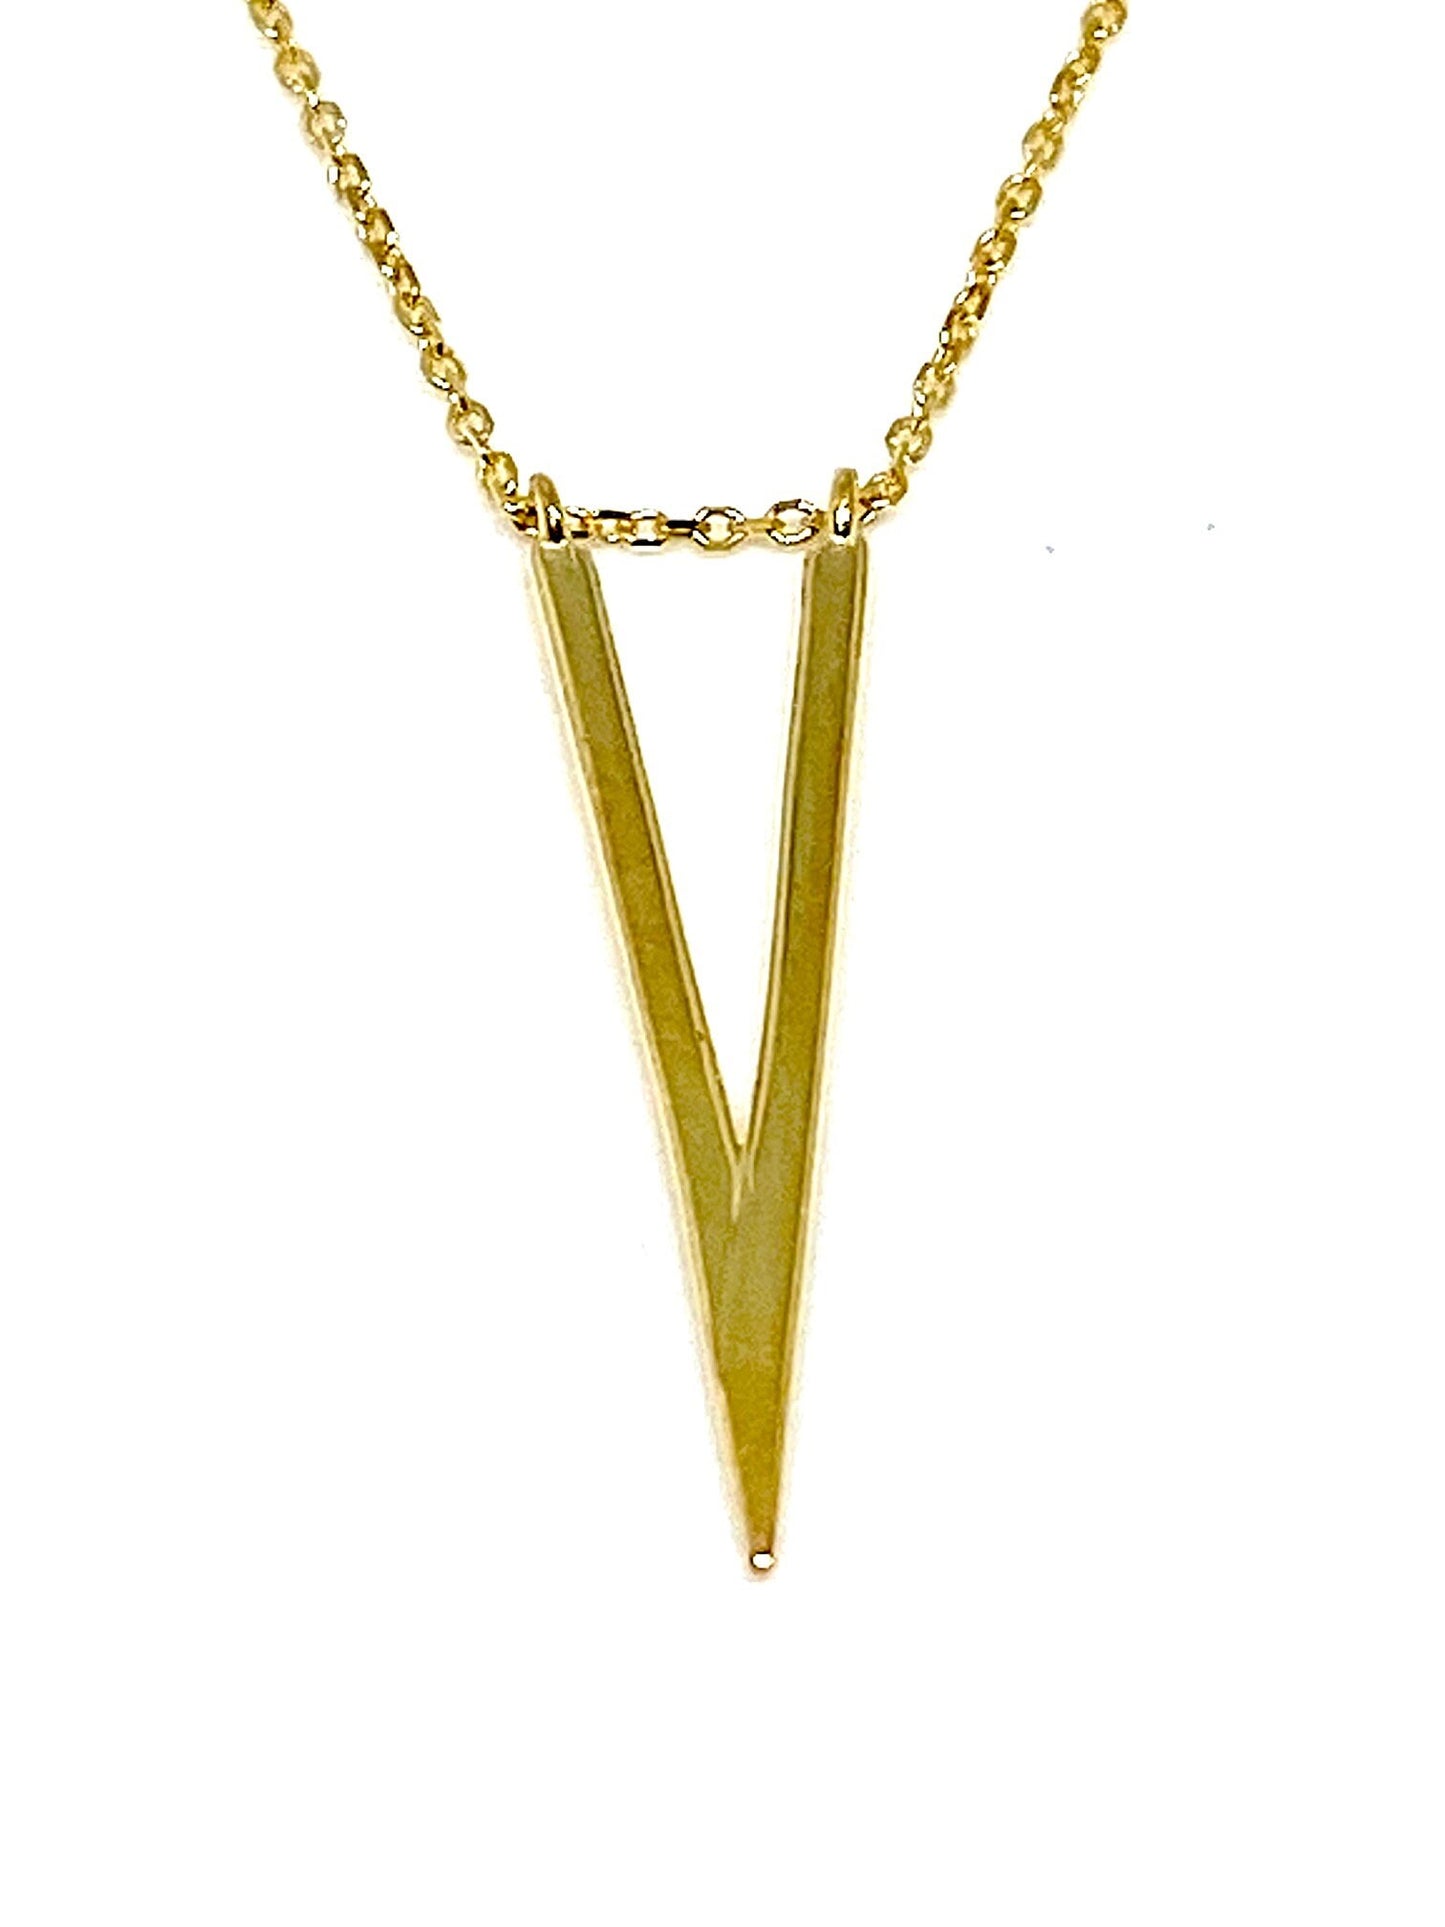 Yellow Gold V Shaped Modernist Pendant Chain Necklace